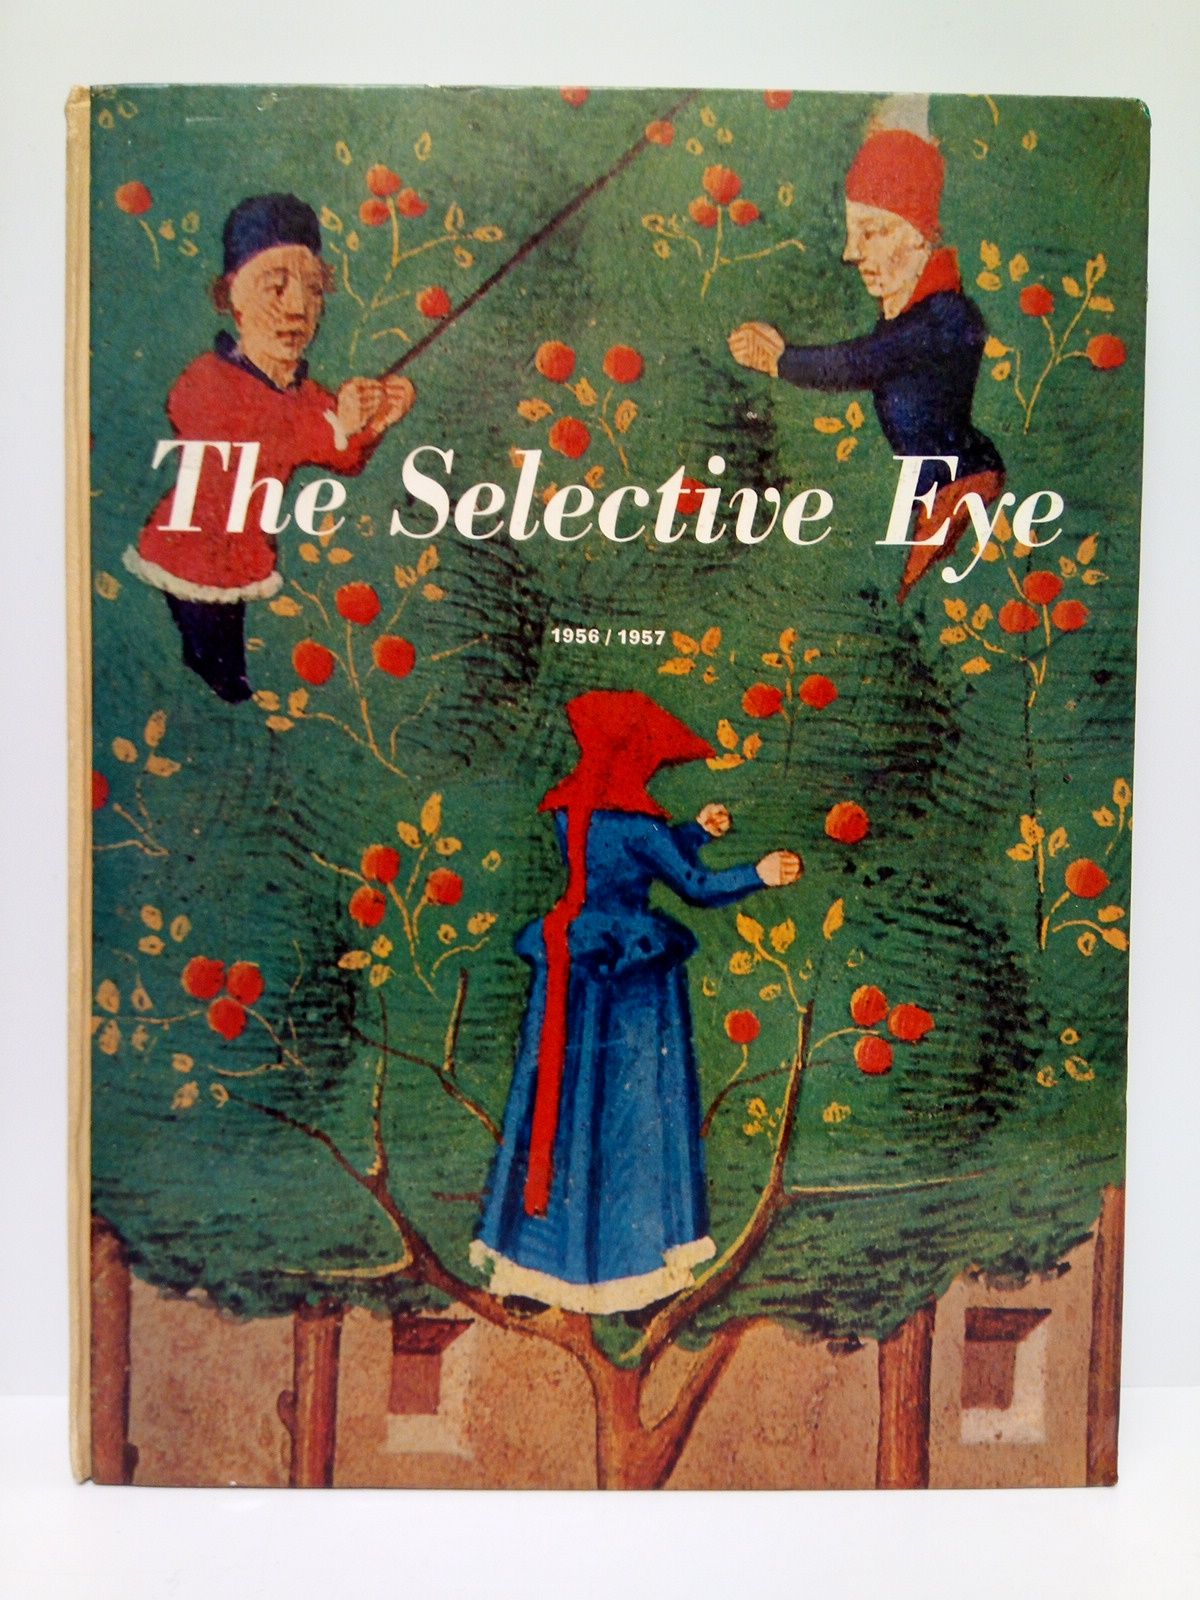 BERNIER, Georges and Rosamond (editan) - The Selective Eye. 1956-57: An anthology of the best from l'oeil, the european art magazine /  Edited by Georges Bernier and Rosamond Bernier [con la colaboracin de importantes especialistas]